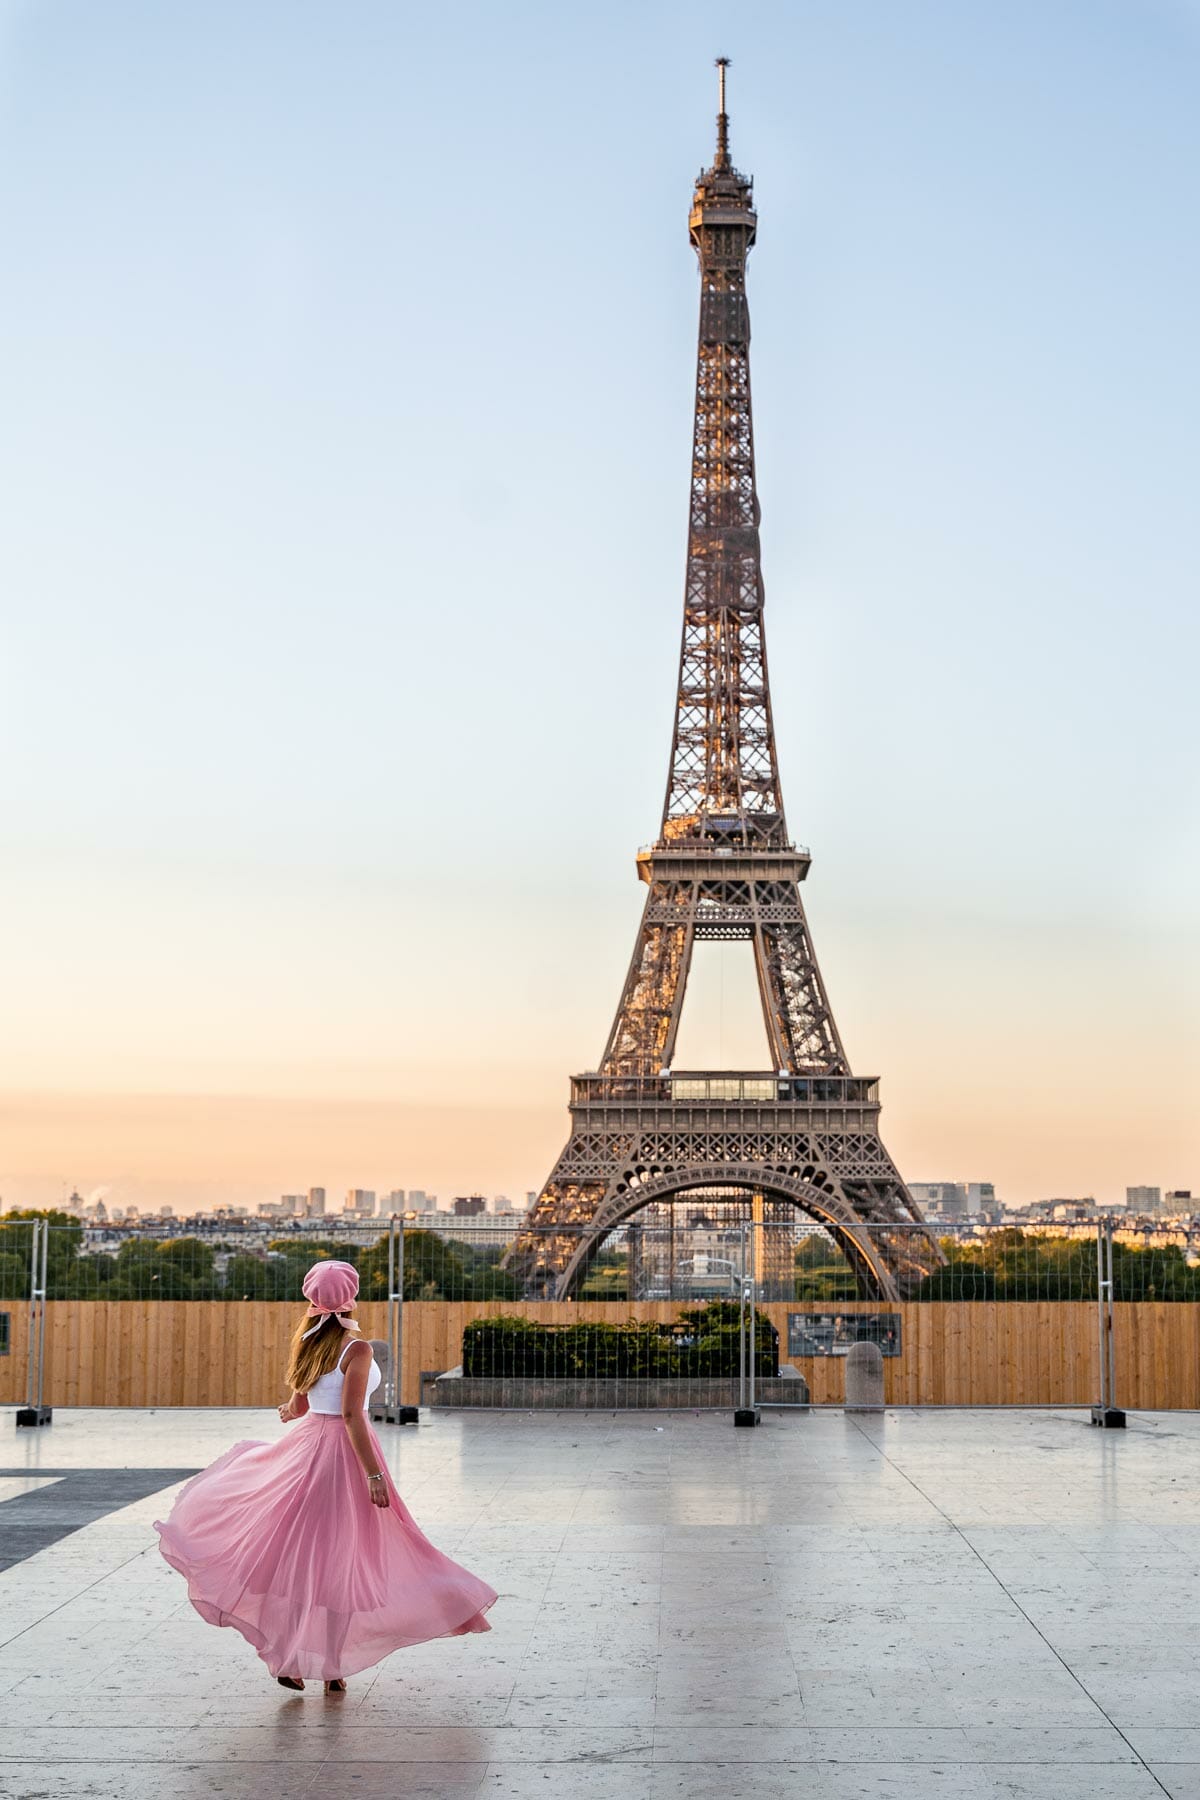 Girl in a pink skirt twirling in front of the Eiffel Tower at Trocadero, one of the most instagrammable places in Paris